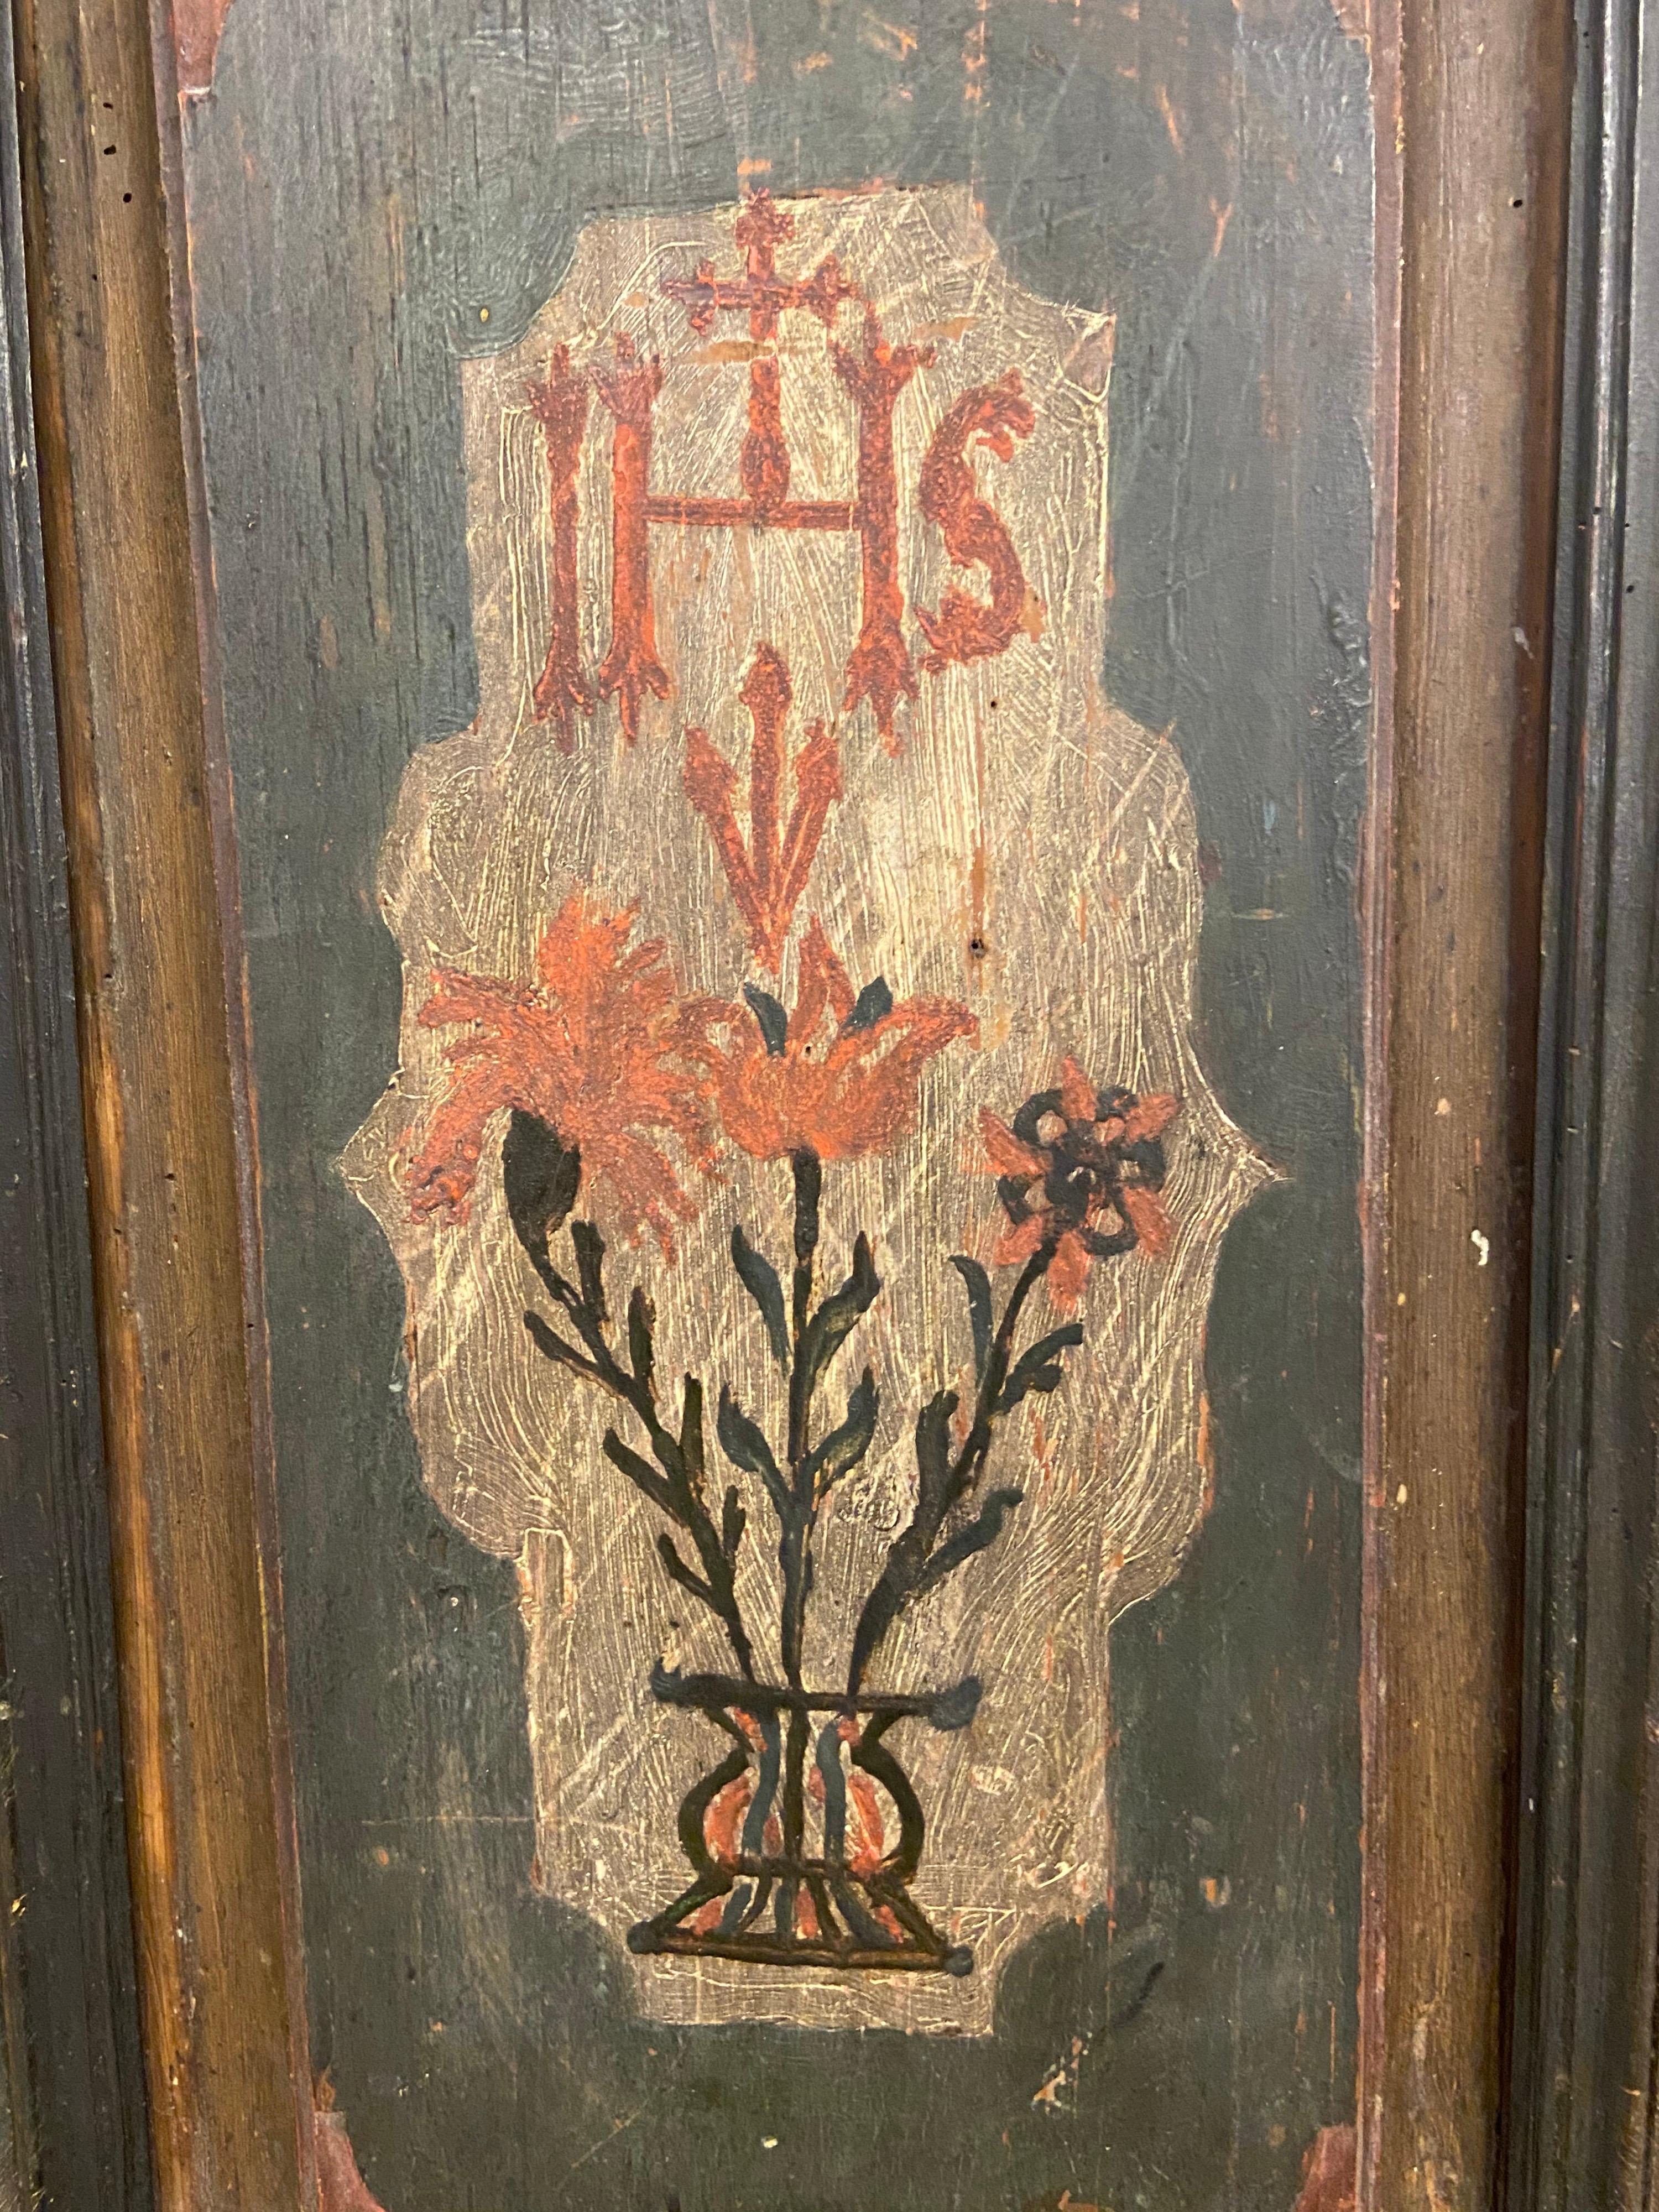 A beautiful armoire from Germany, circa 1820.

This wardrobe is a solid pine and is hand painted in a very good condition.